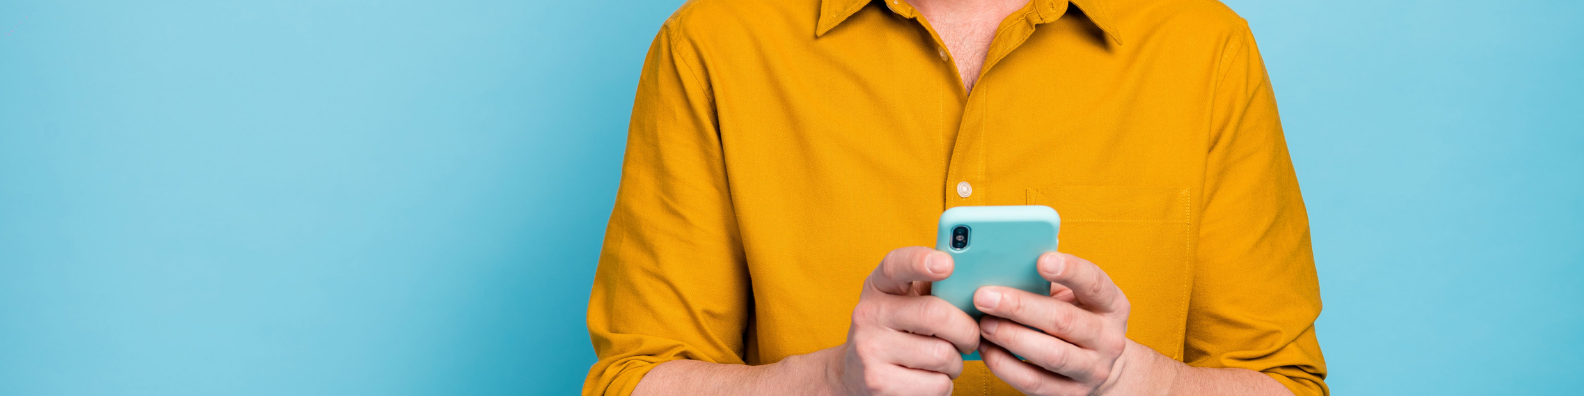 Man in yellow orange shirt holding an iphone 11 ansering online questionnaire